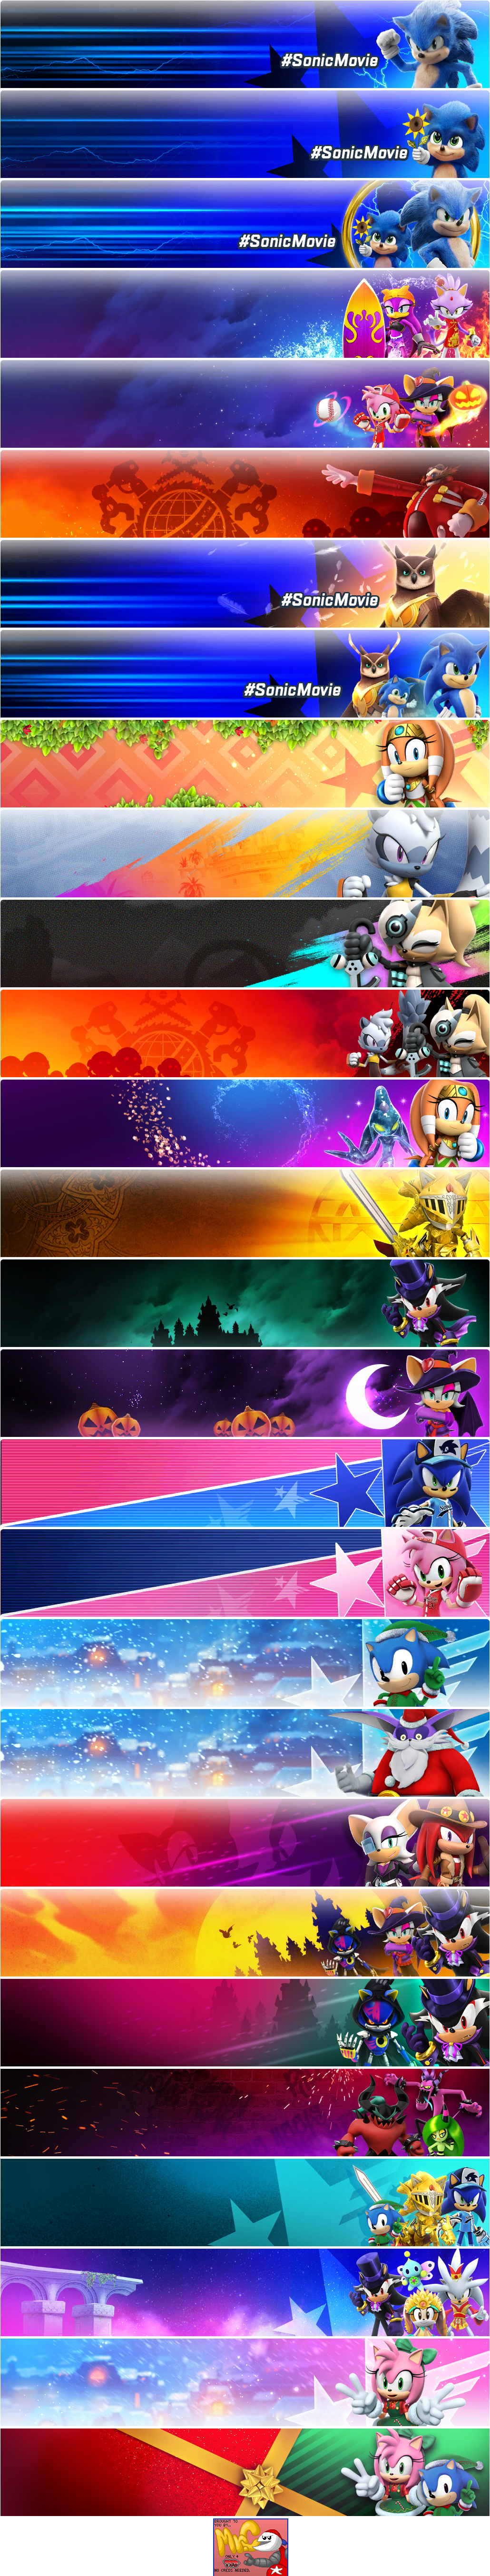 Event Banners (2020)